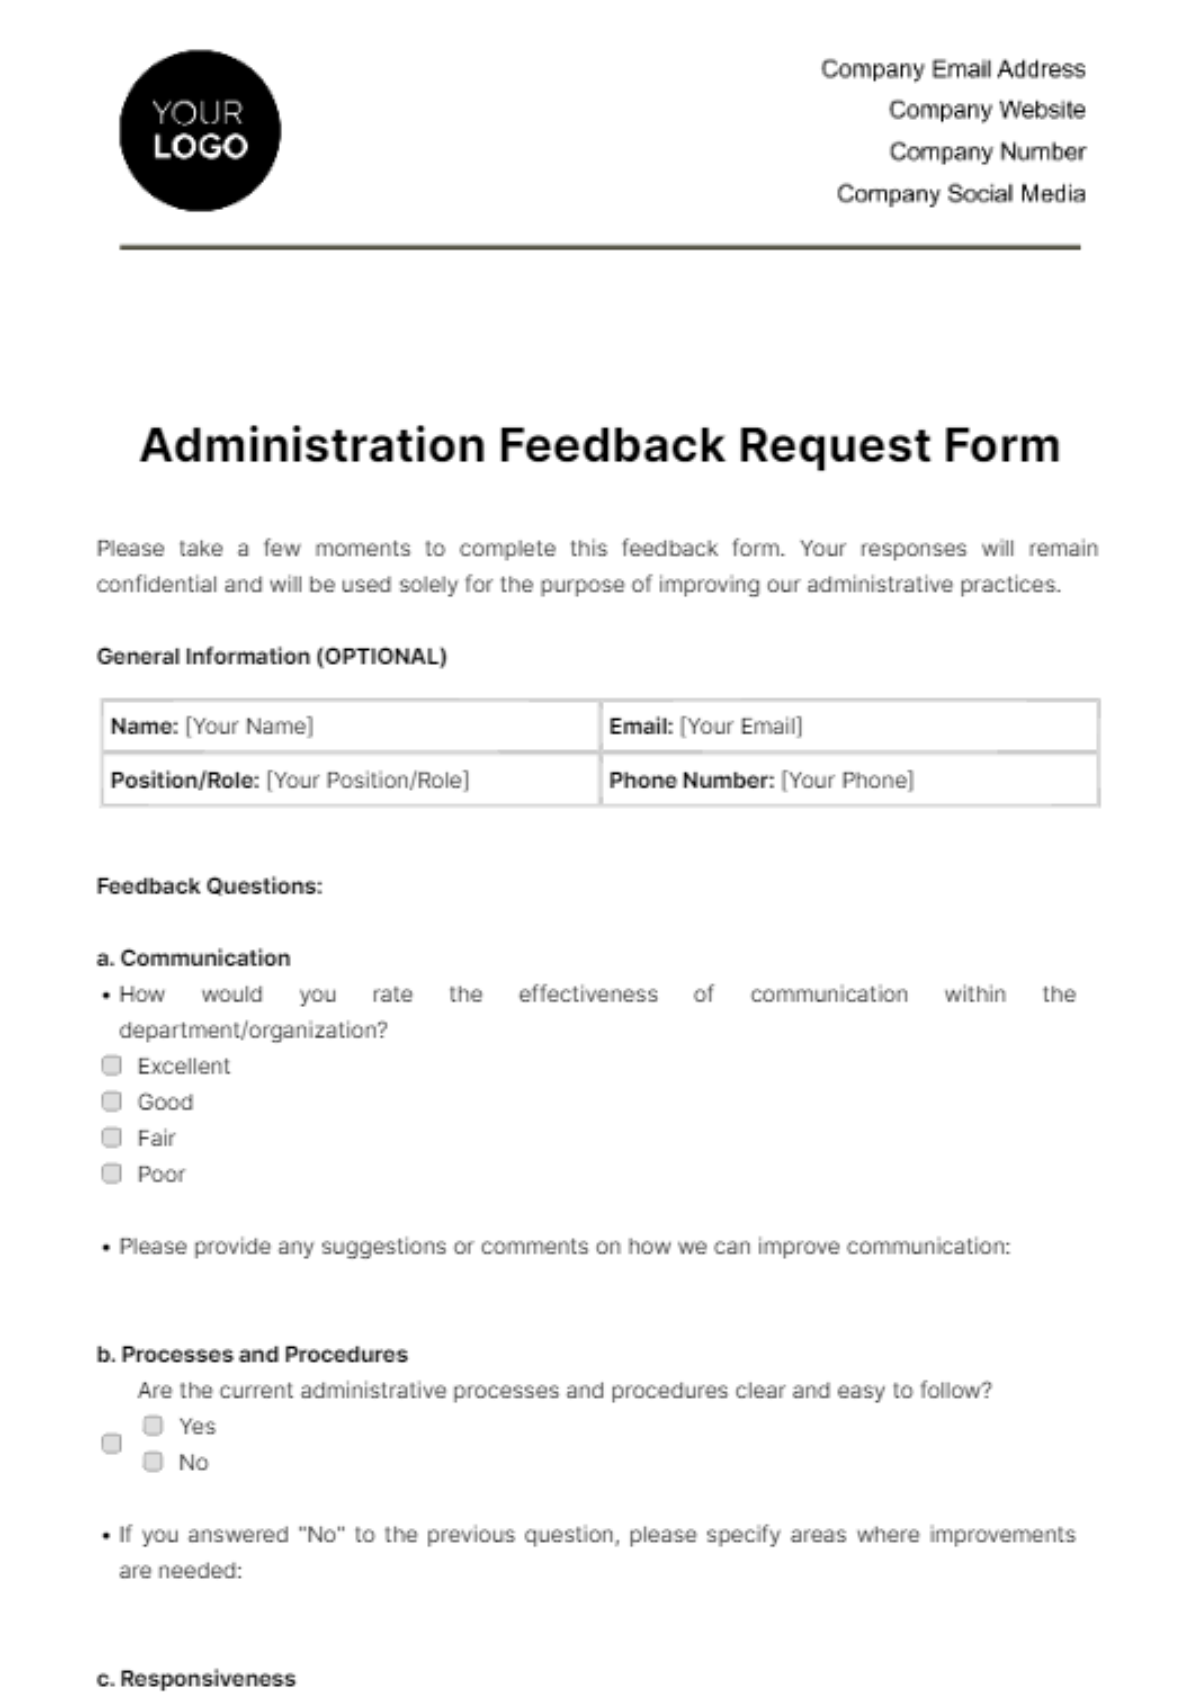 Administration Feedback Request Form Template